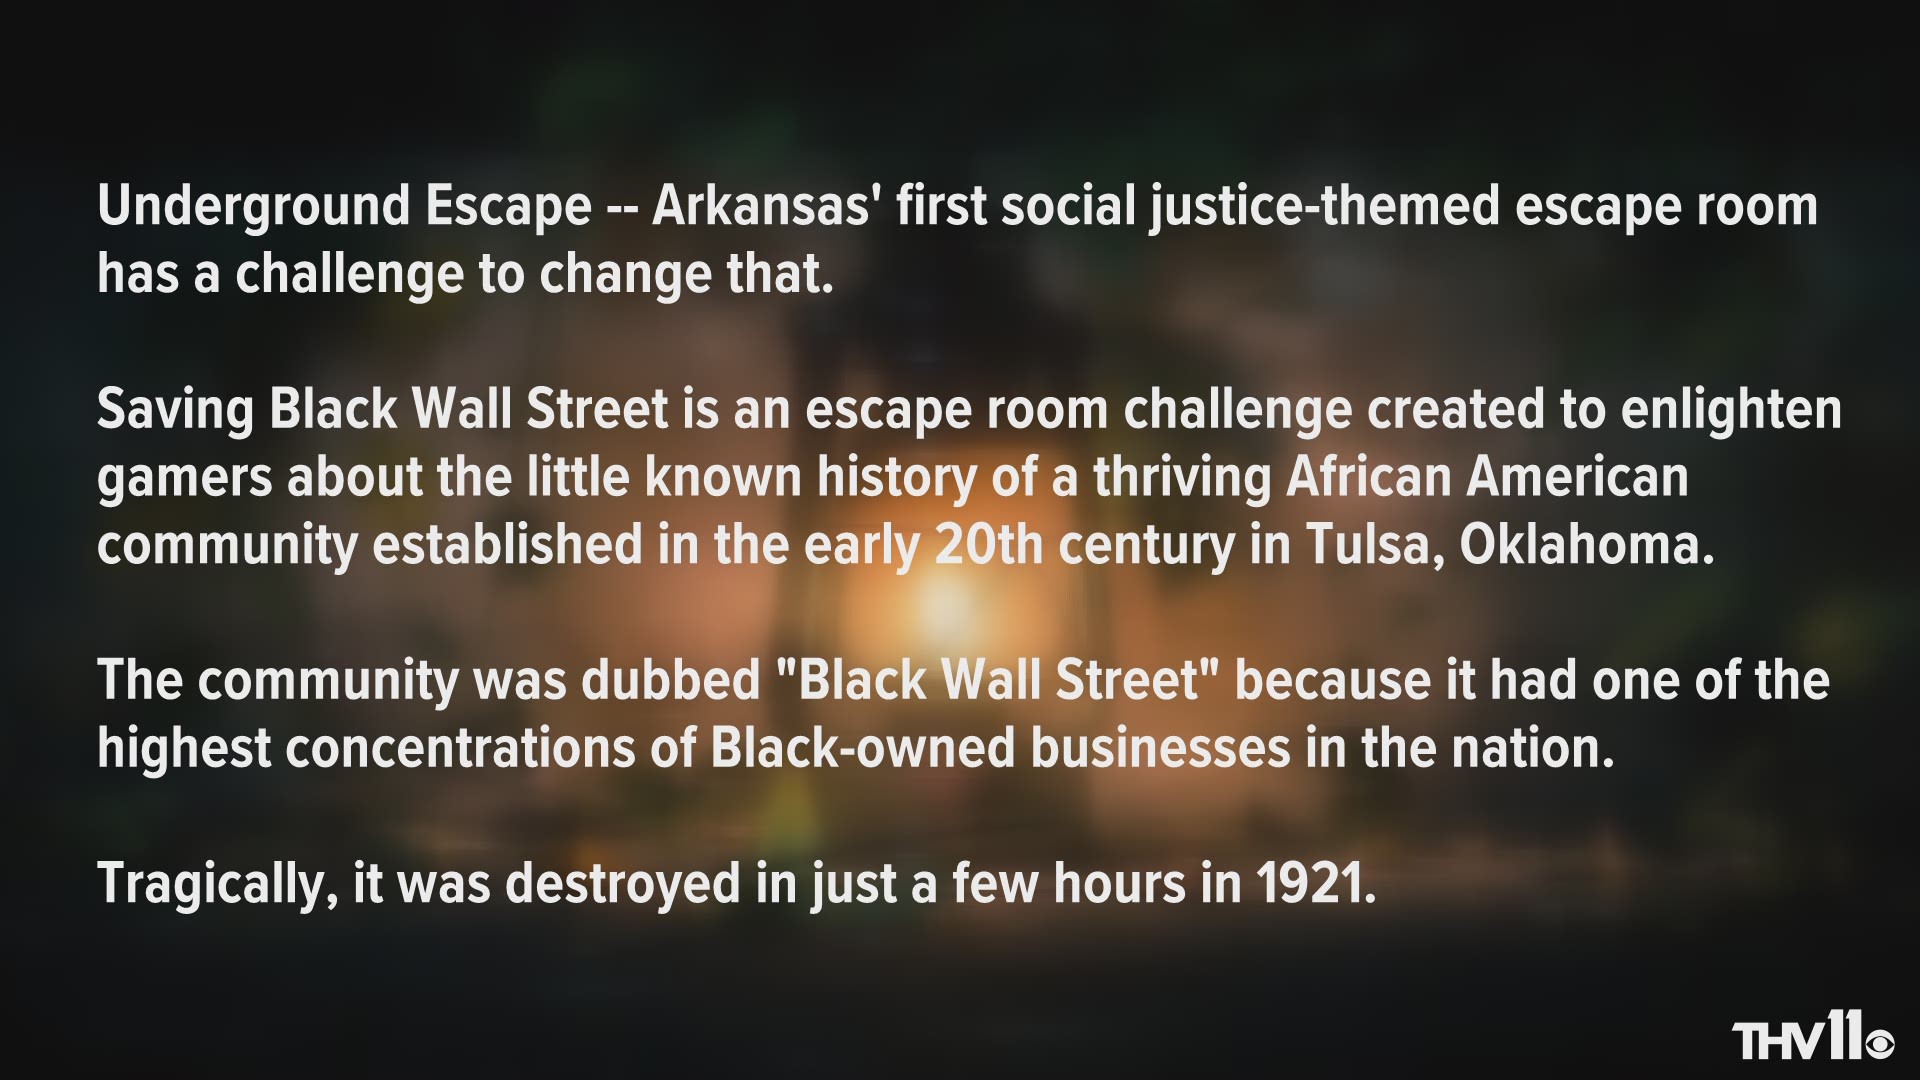 As players explore the room, they’ll learn how Black entrepreneurs built their own successful economy in the face of segregation and denied opportunities.  They’ll even discover interesting Arkansas connections to this remarkable story!